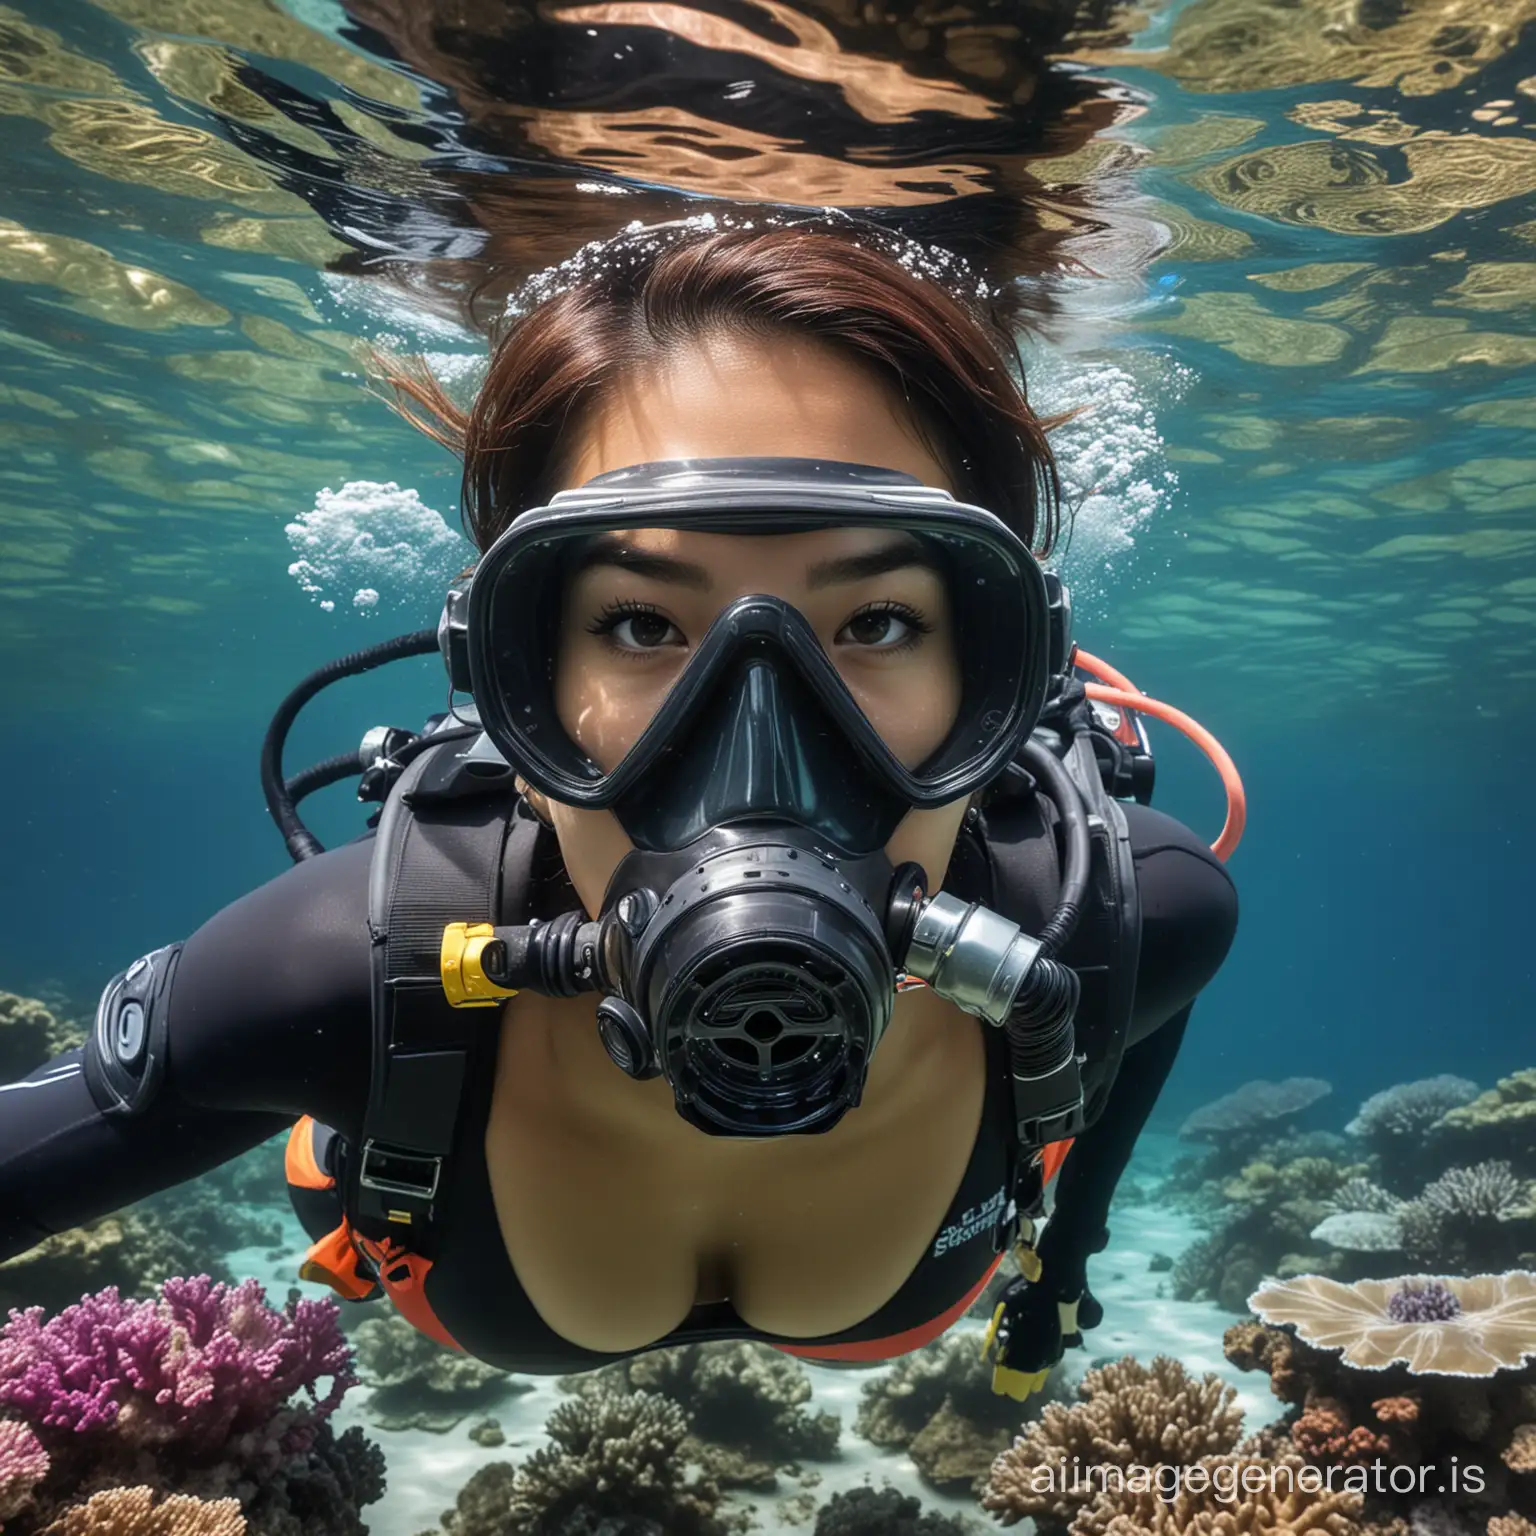 Busty-Asian-Scuba-Diver-Explores-Colorful-Underwater-Reef